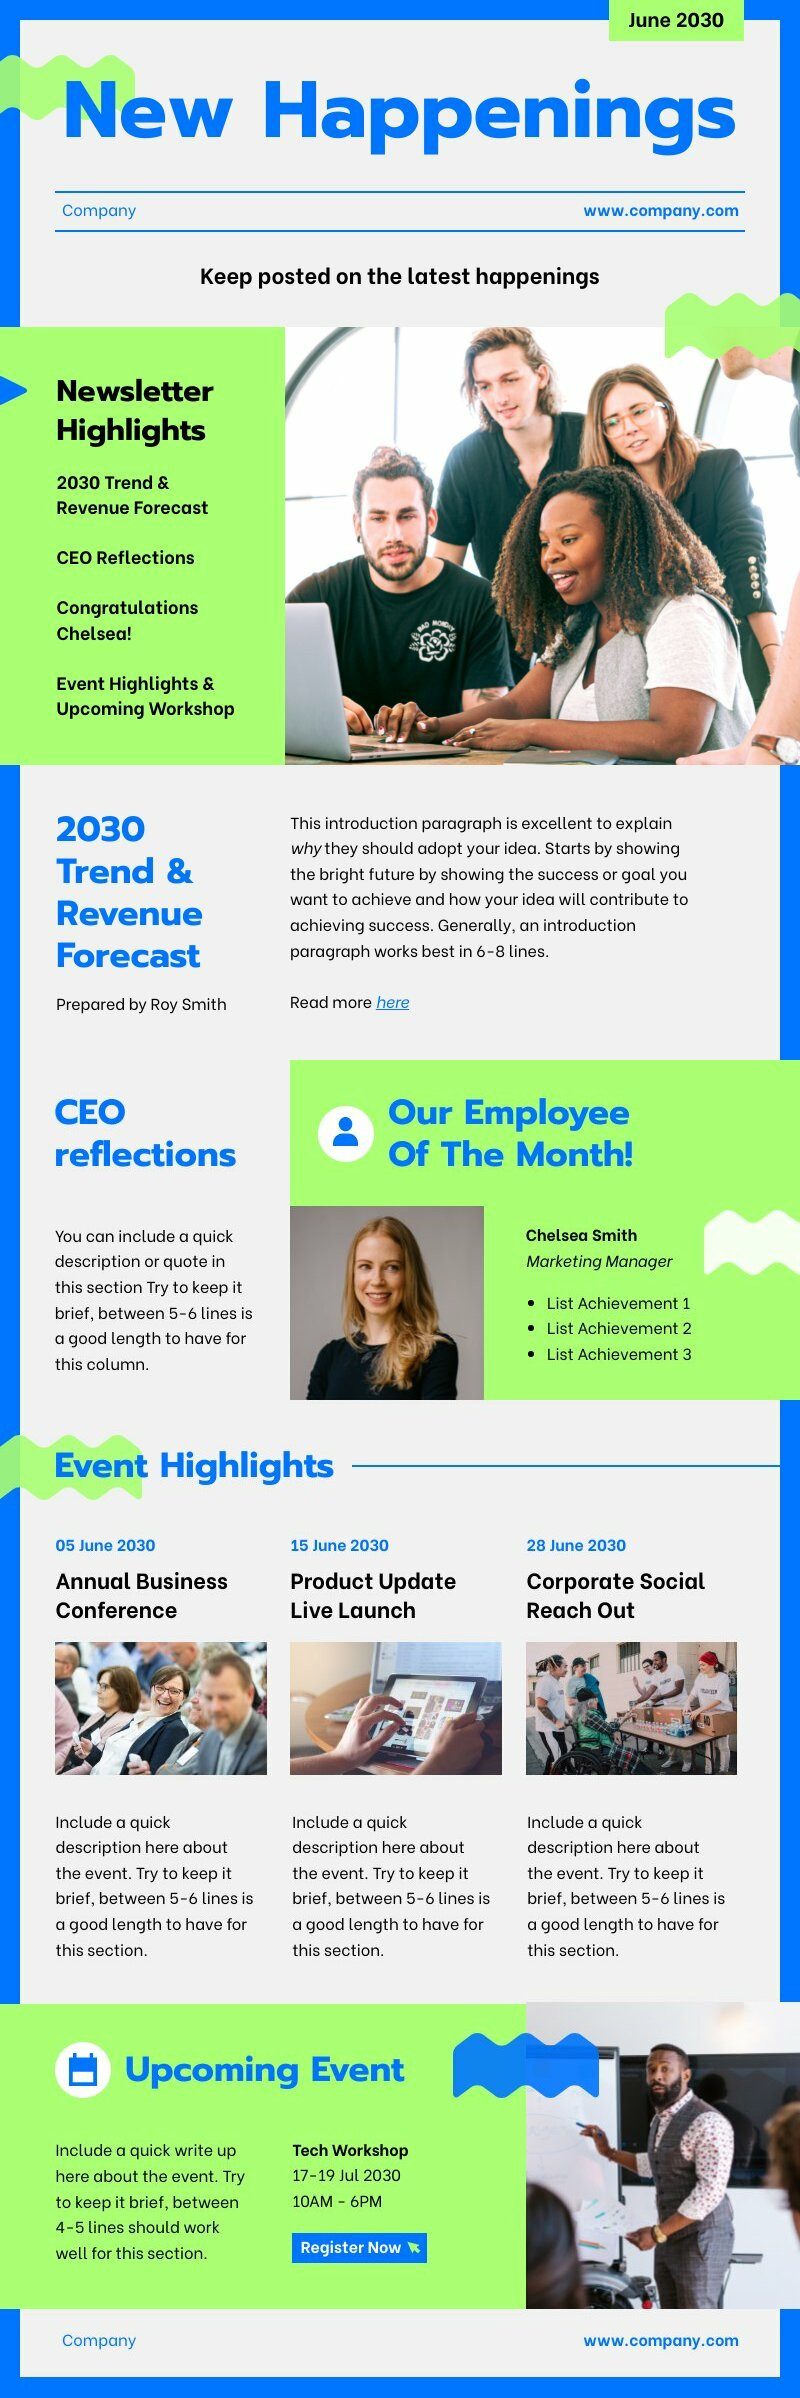 Company Newsletter Highlights